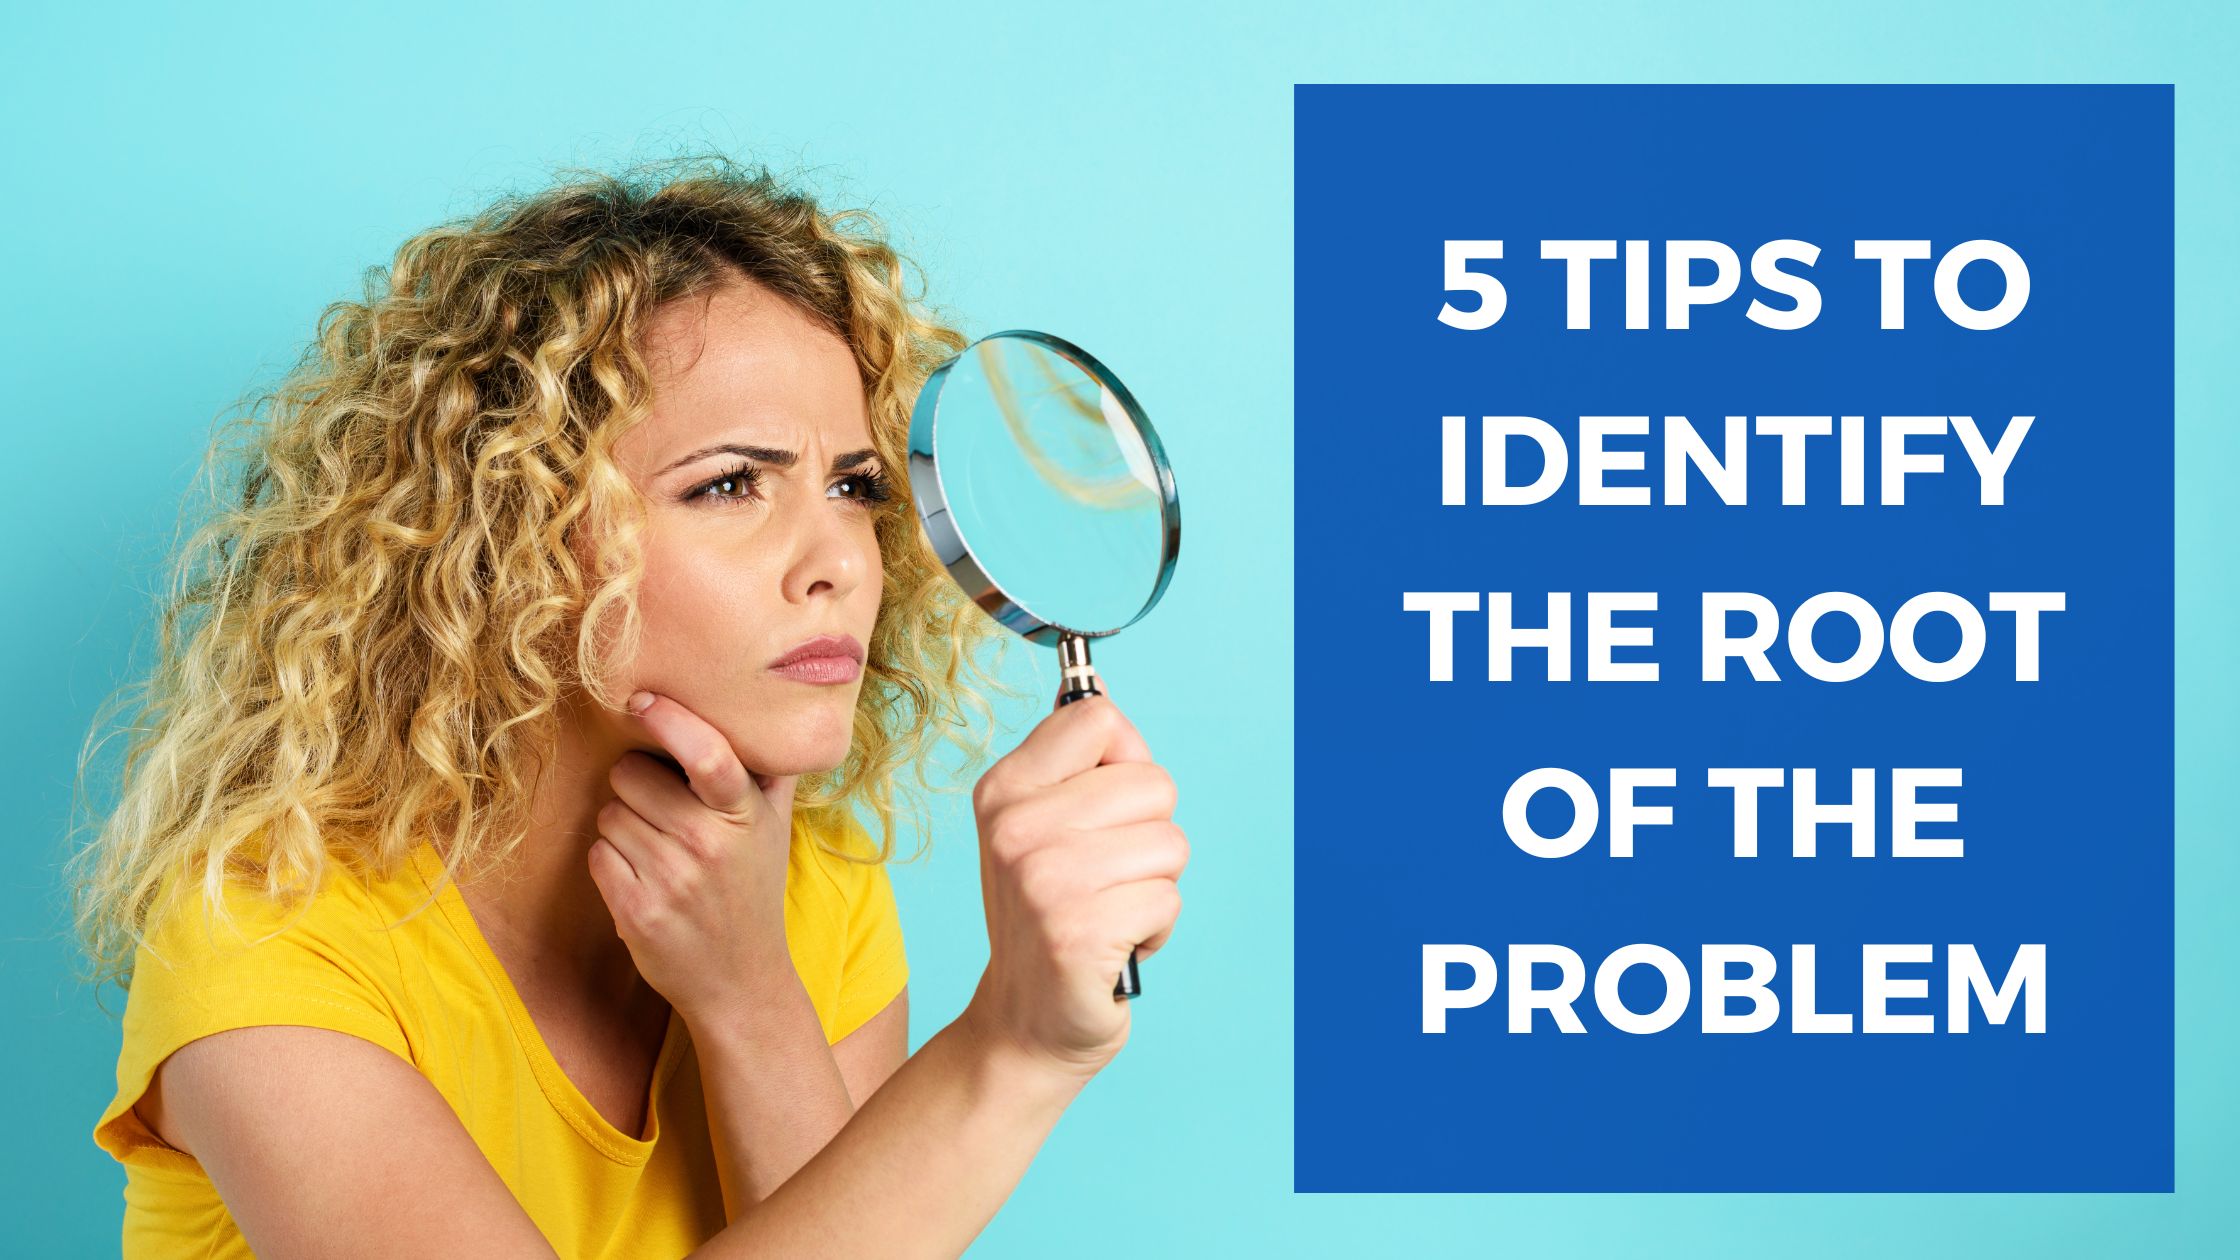 5 tips to identify the root of the problem